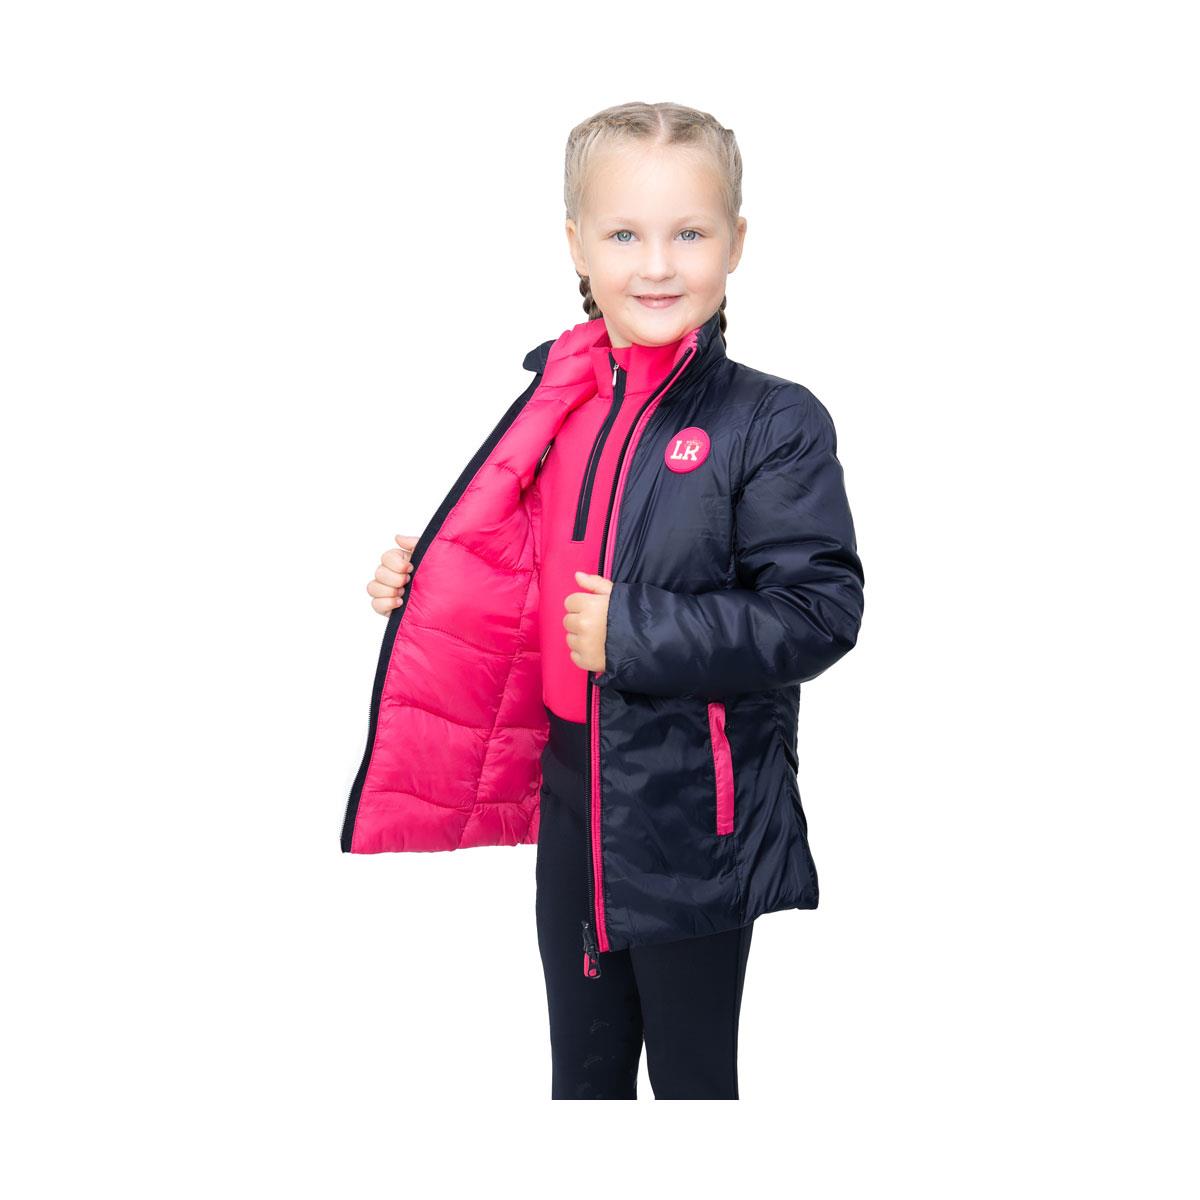 Hy Equestrian Analise Reversible Padded Jacket by Little Rider - Just Horse Riders